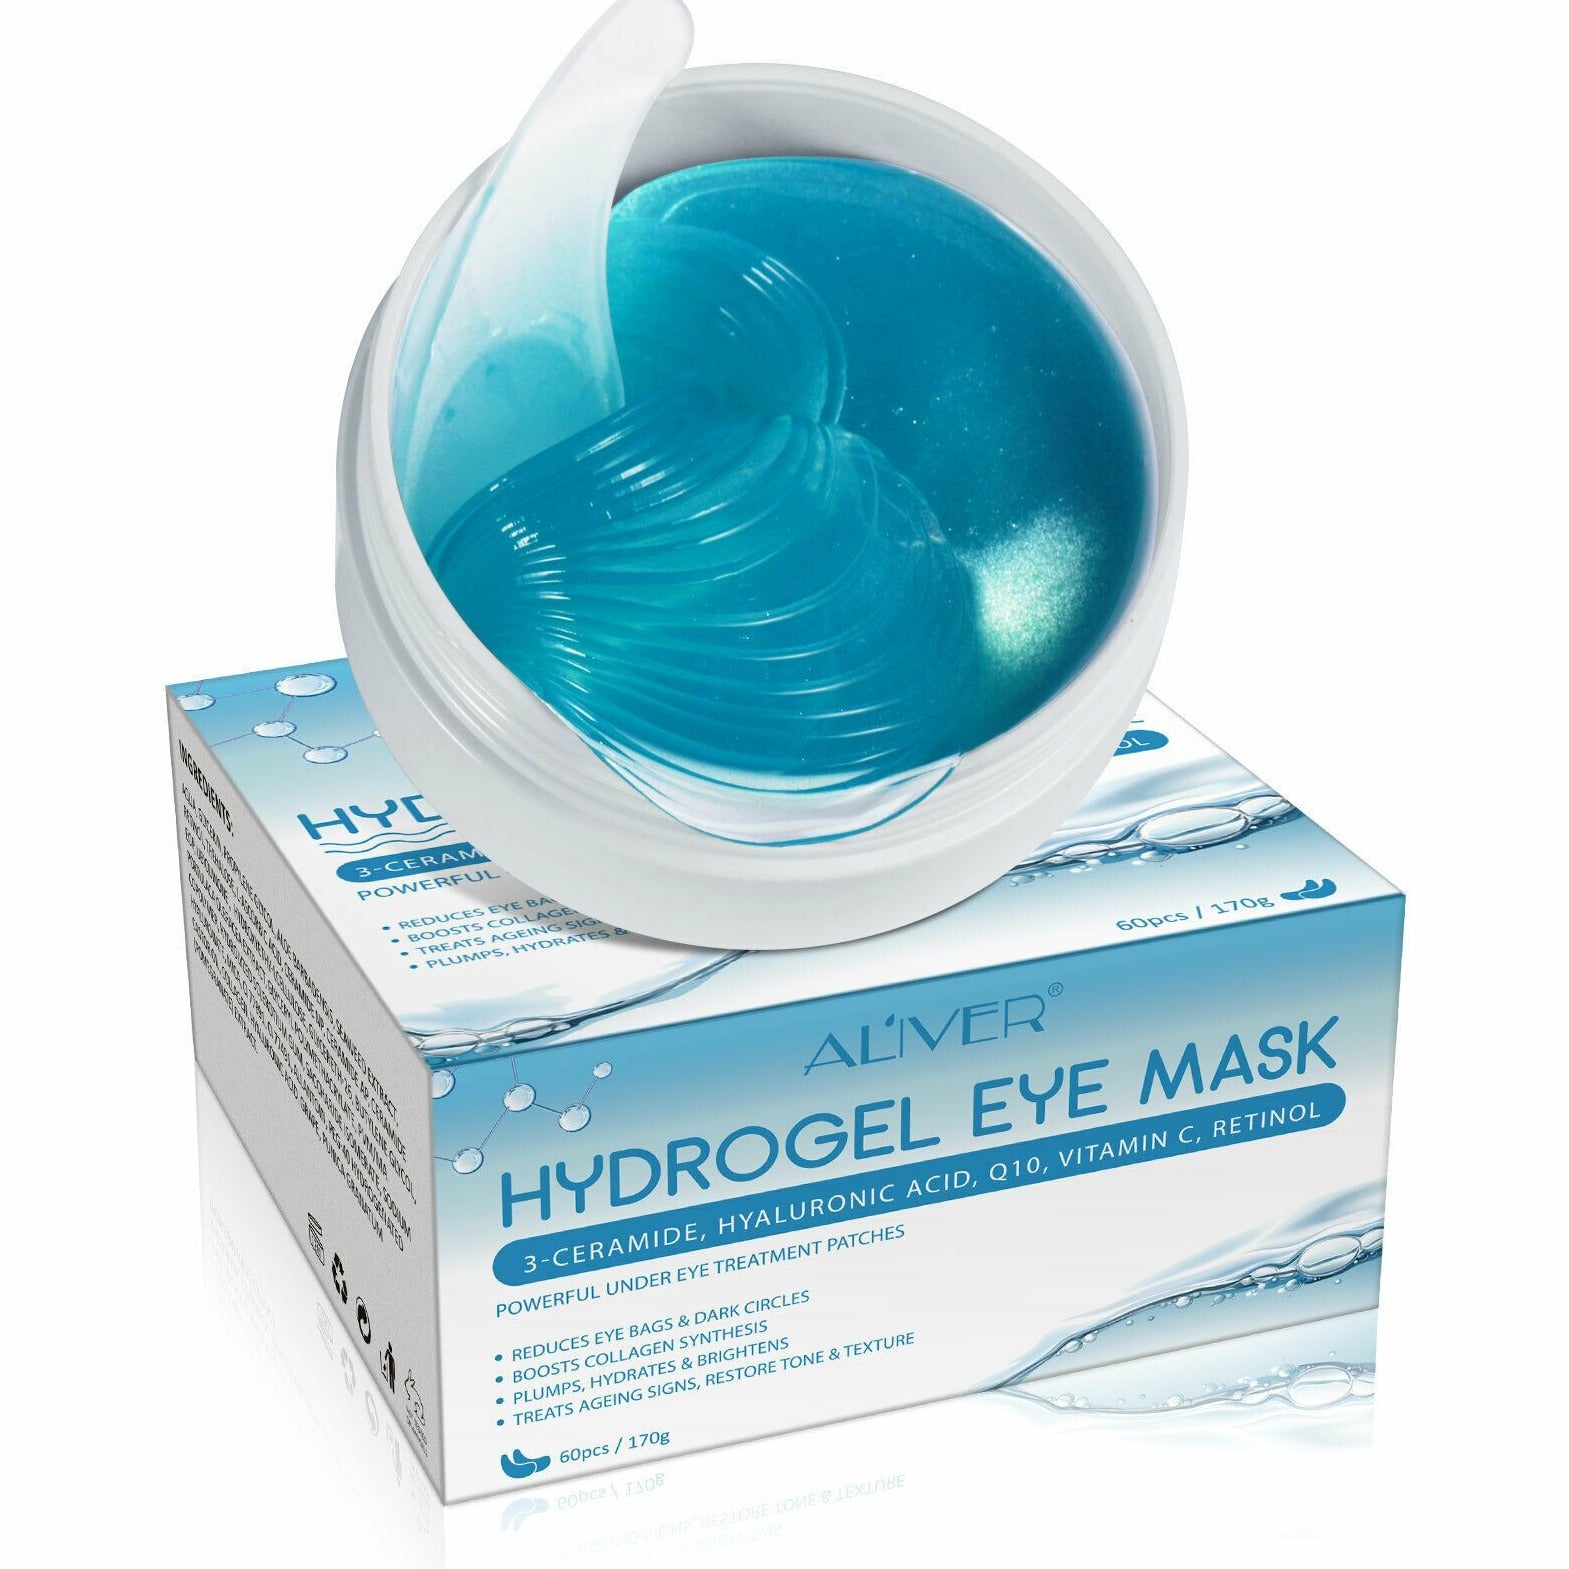 Aliver Hydrogel Hyaluronic & Retinol Mask Patches Under Eye Treatment Deeply Hydrates and Rejuvenates Under Eye Skin - 60pcs Pack